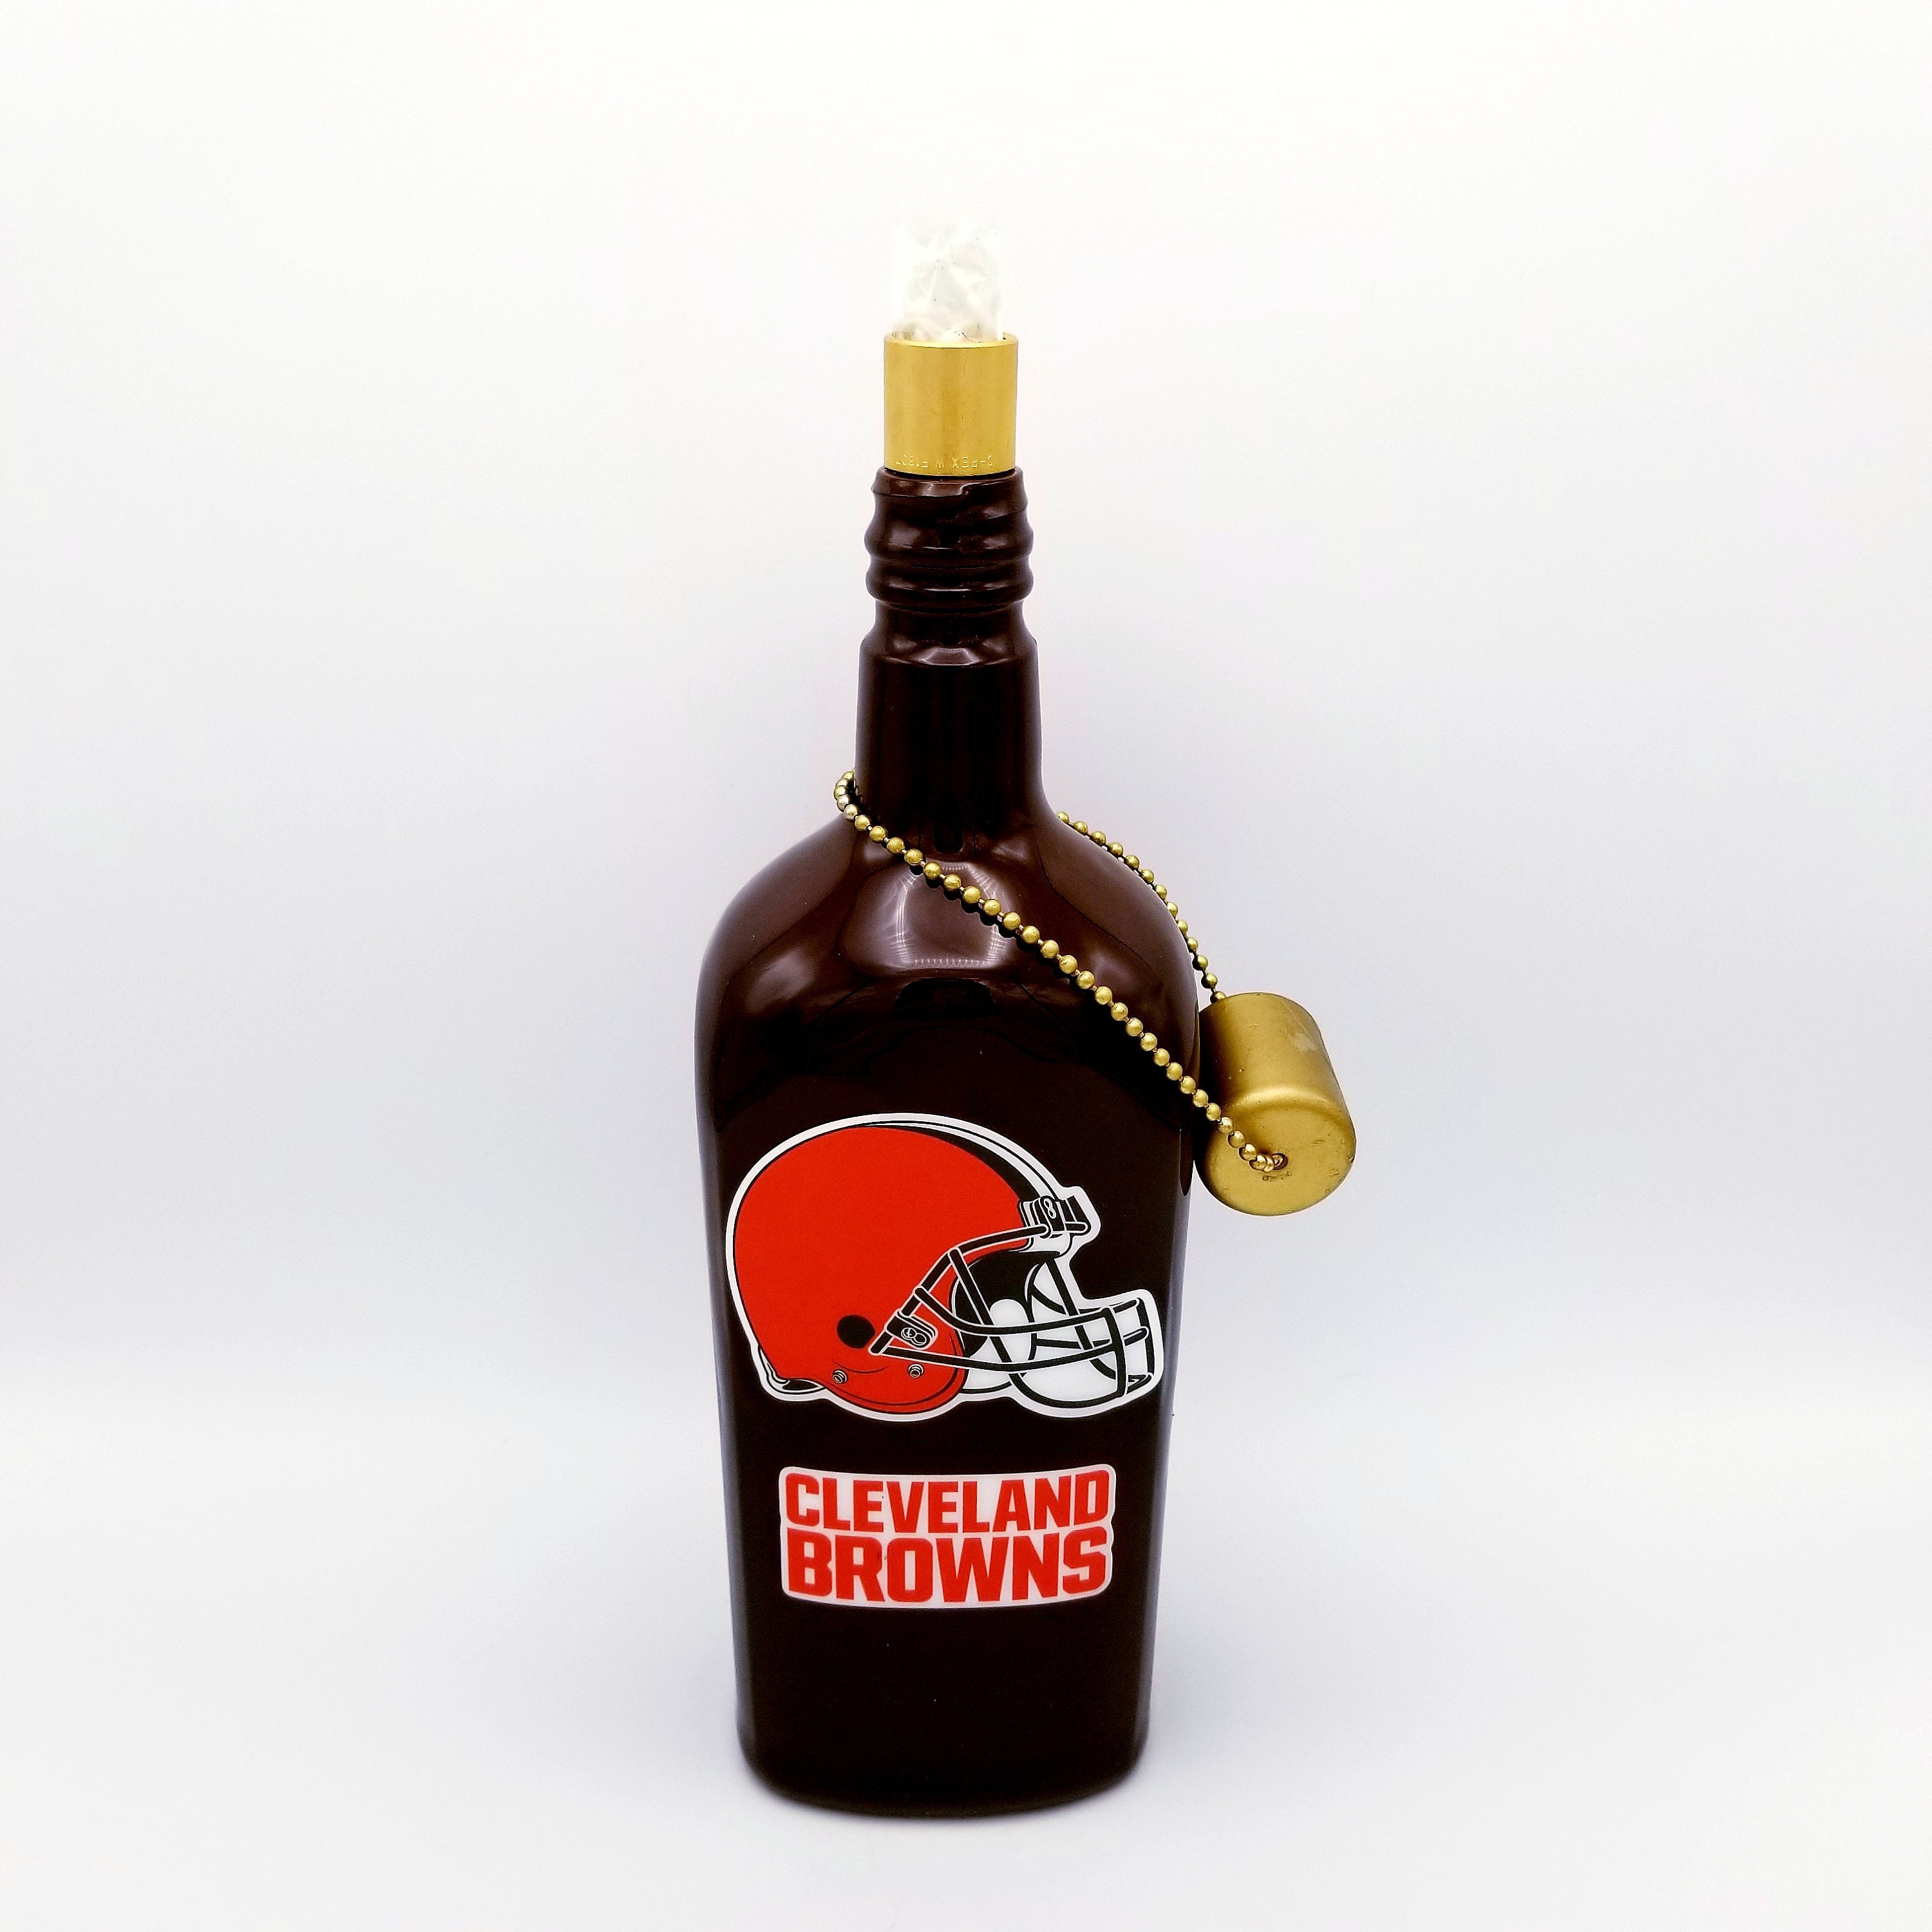 You can buy Browns-themed wine bottles